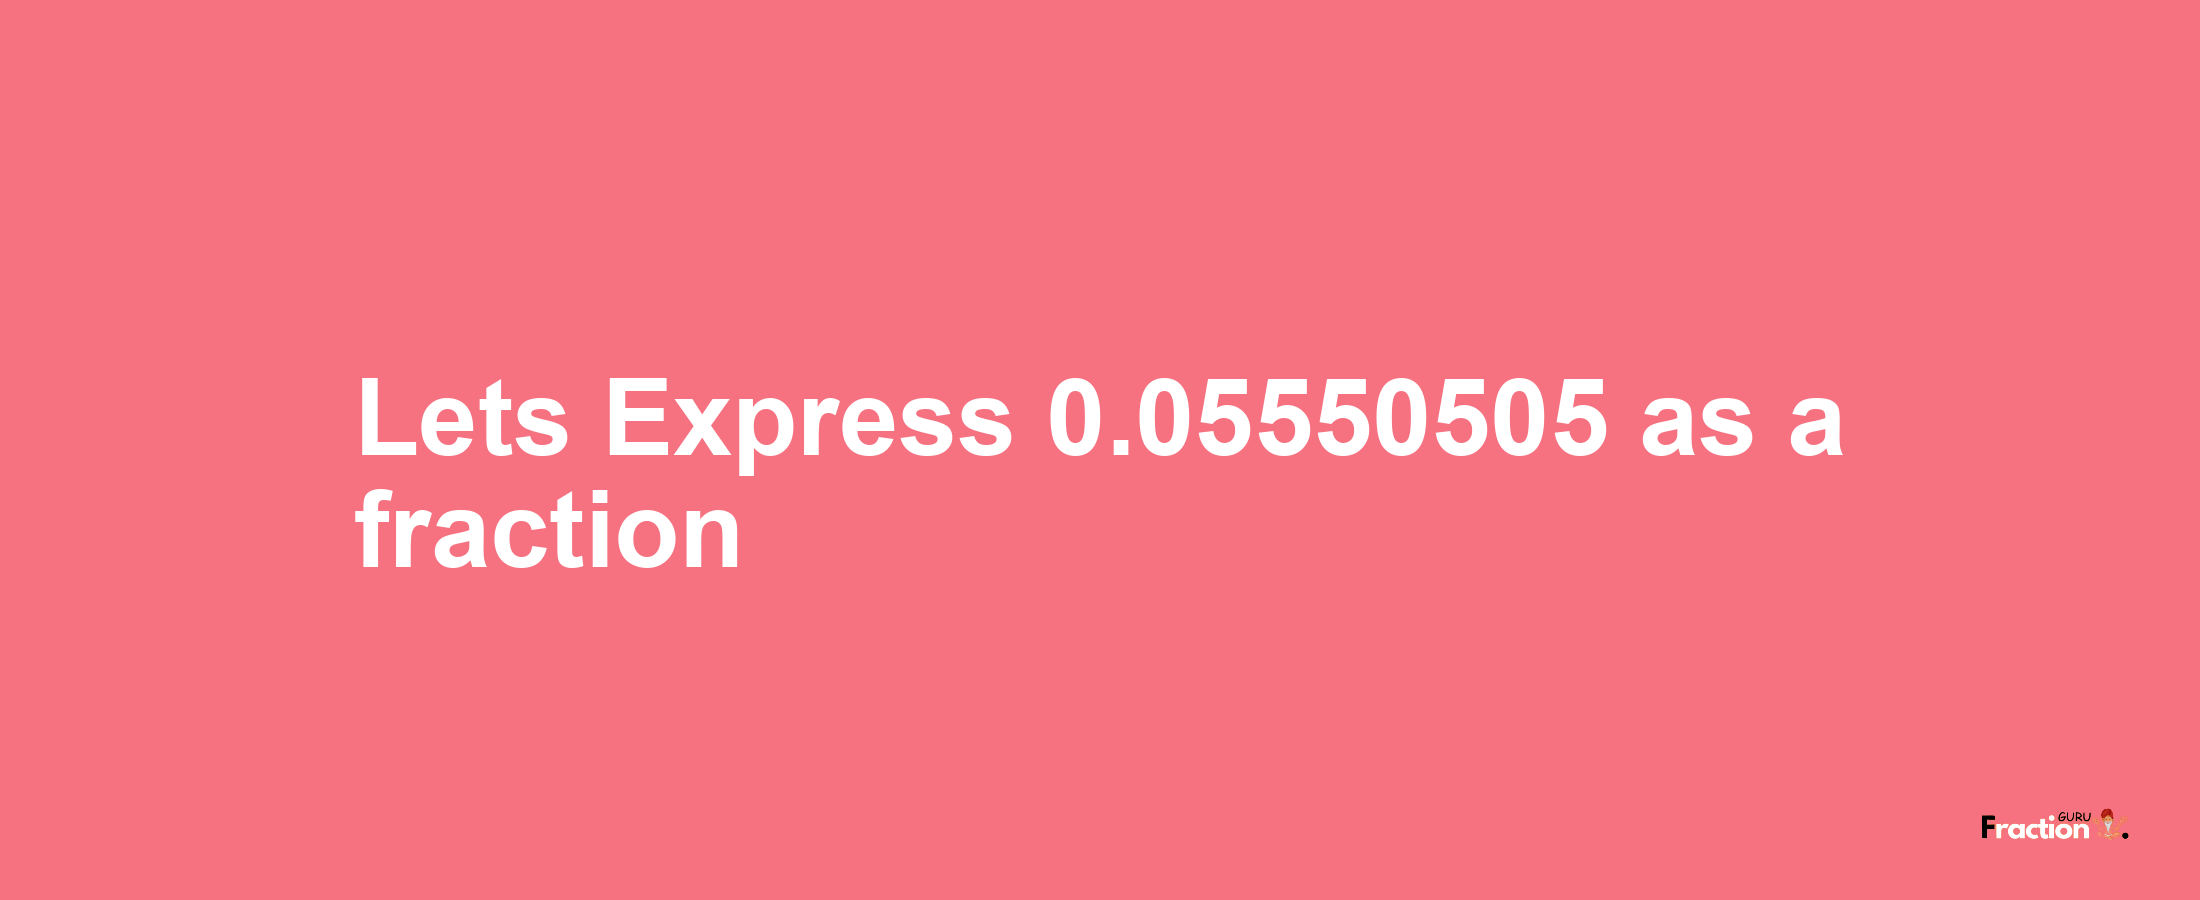 Lets Express 0.05550505 as afraction